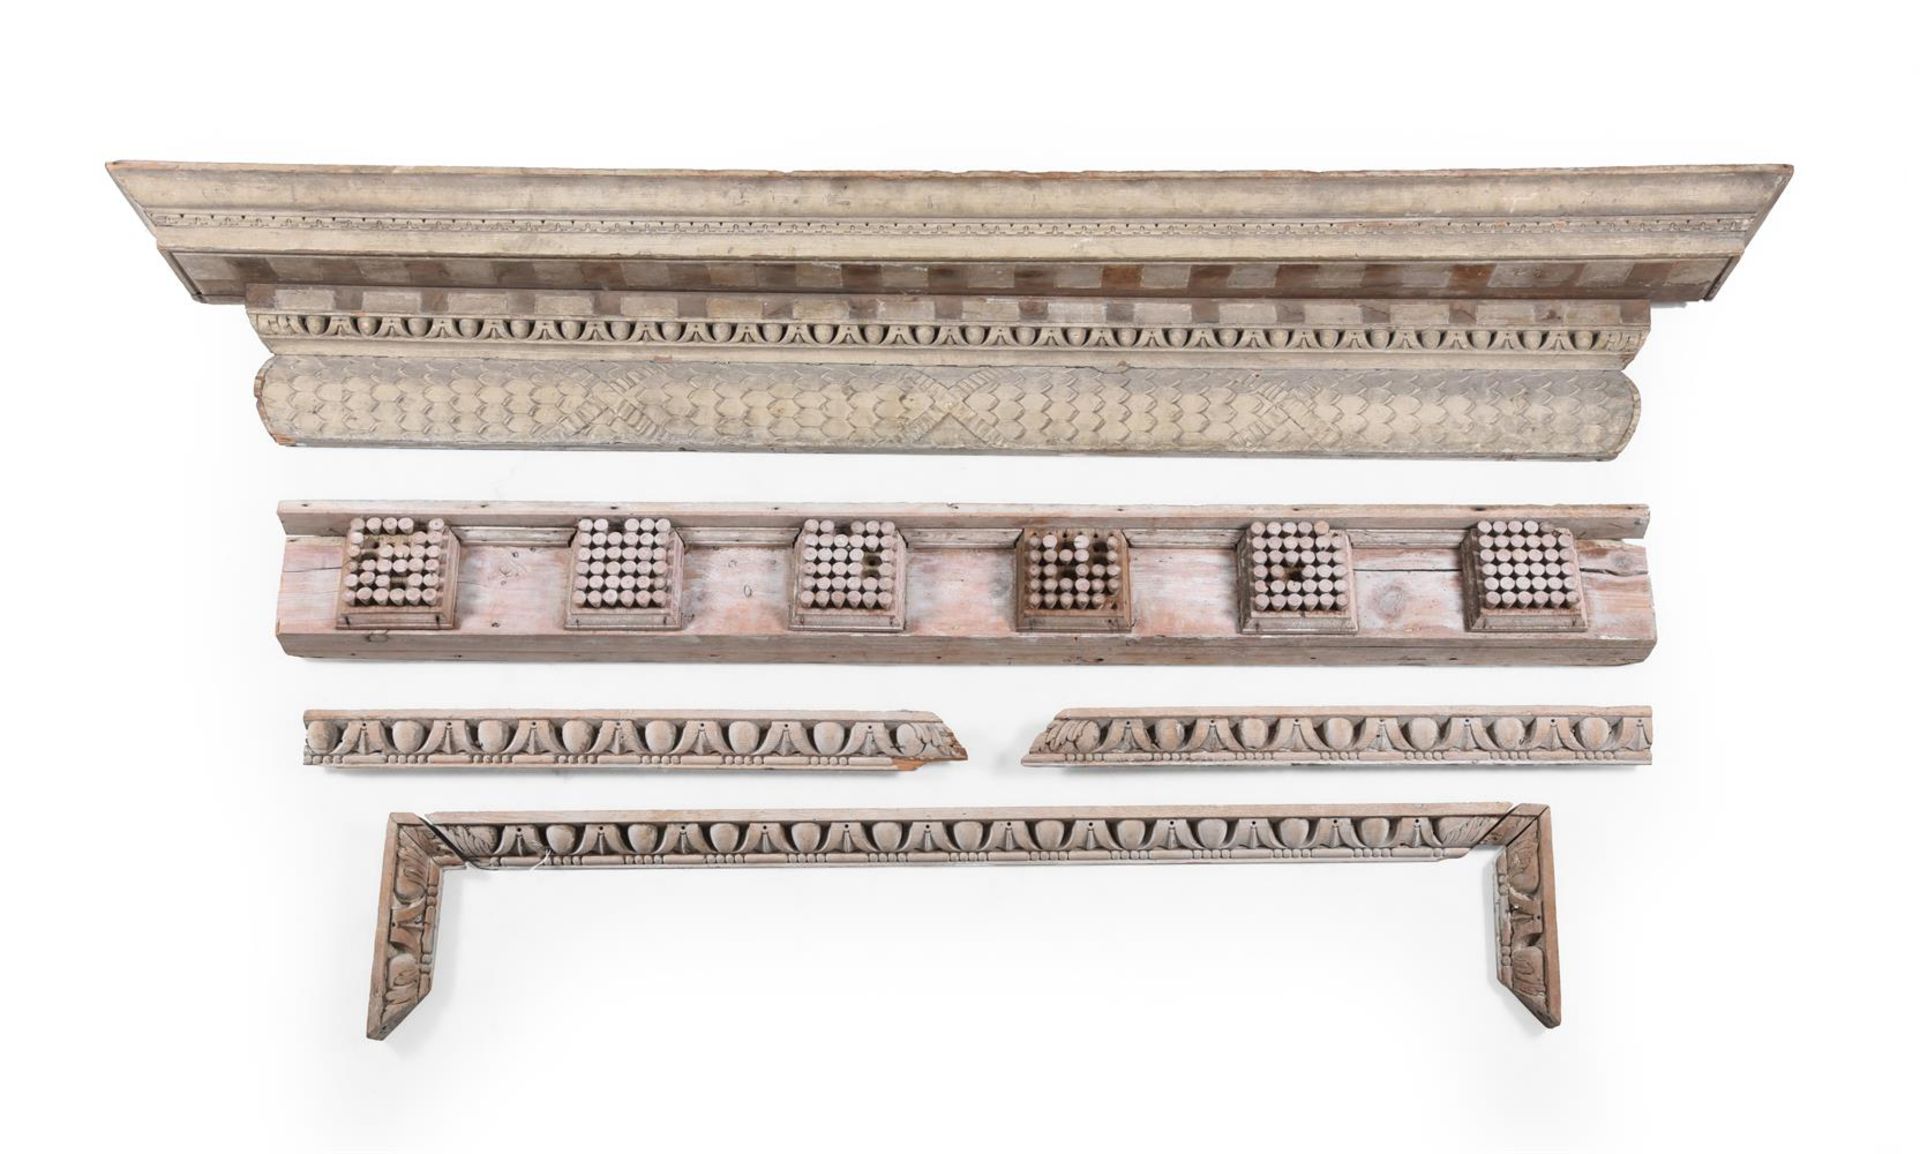 TWO GEORGE II CARVED PINE OVER DOORS OR MANTLES, IN THE KENTIAN MANNER, 18TH CENTURY